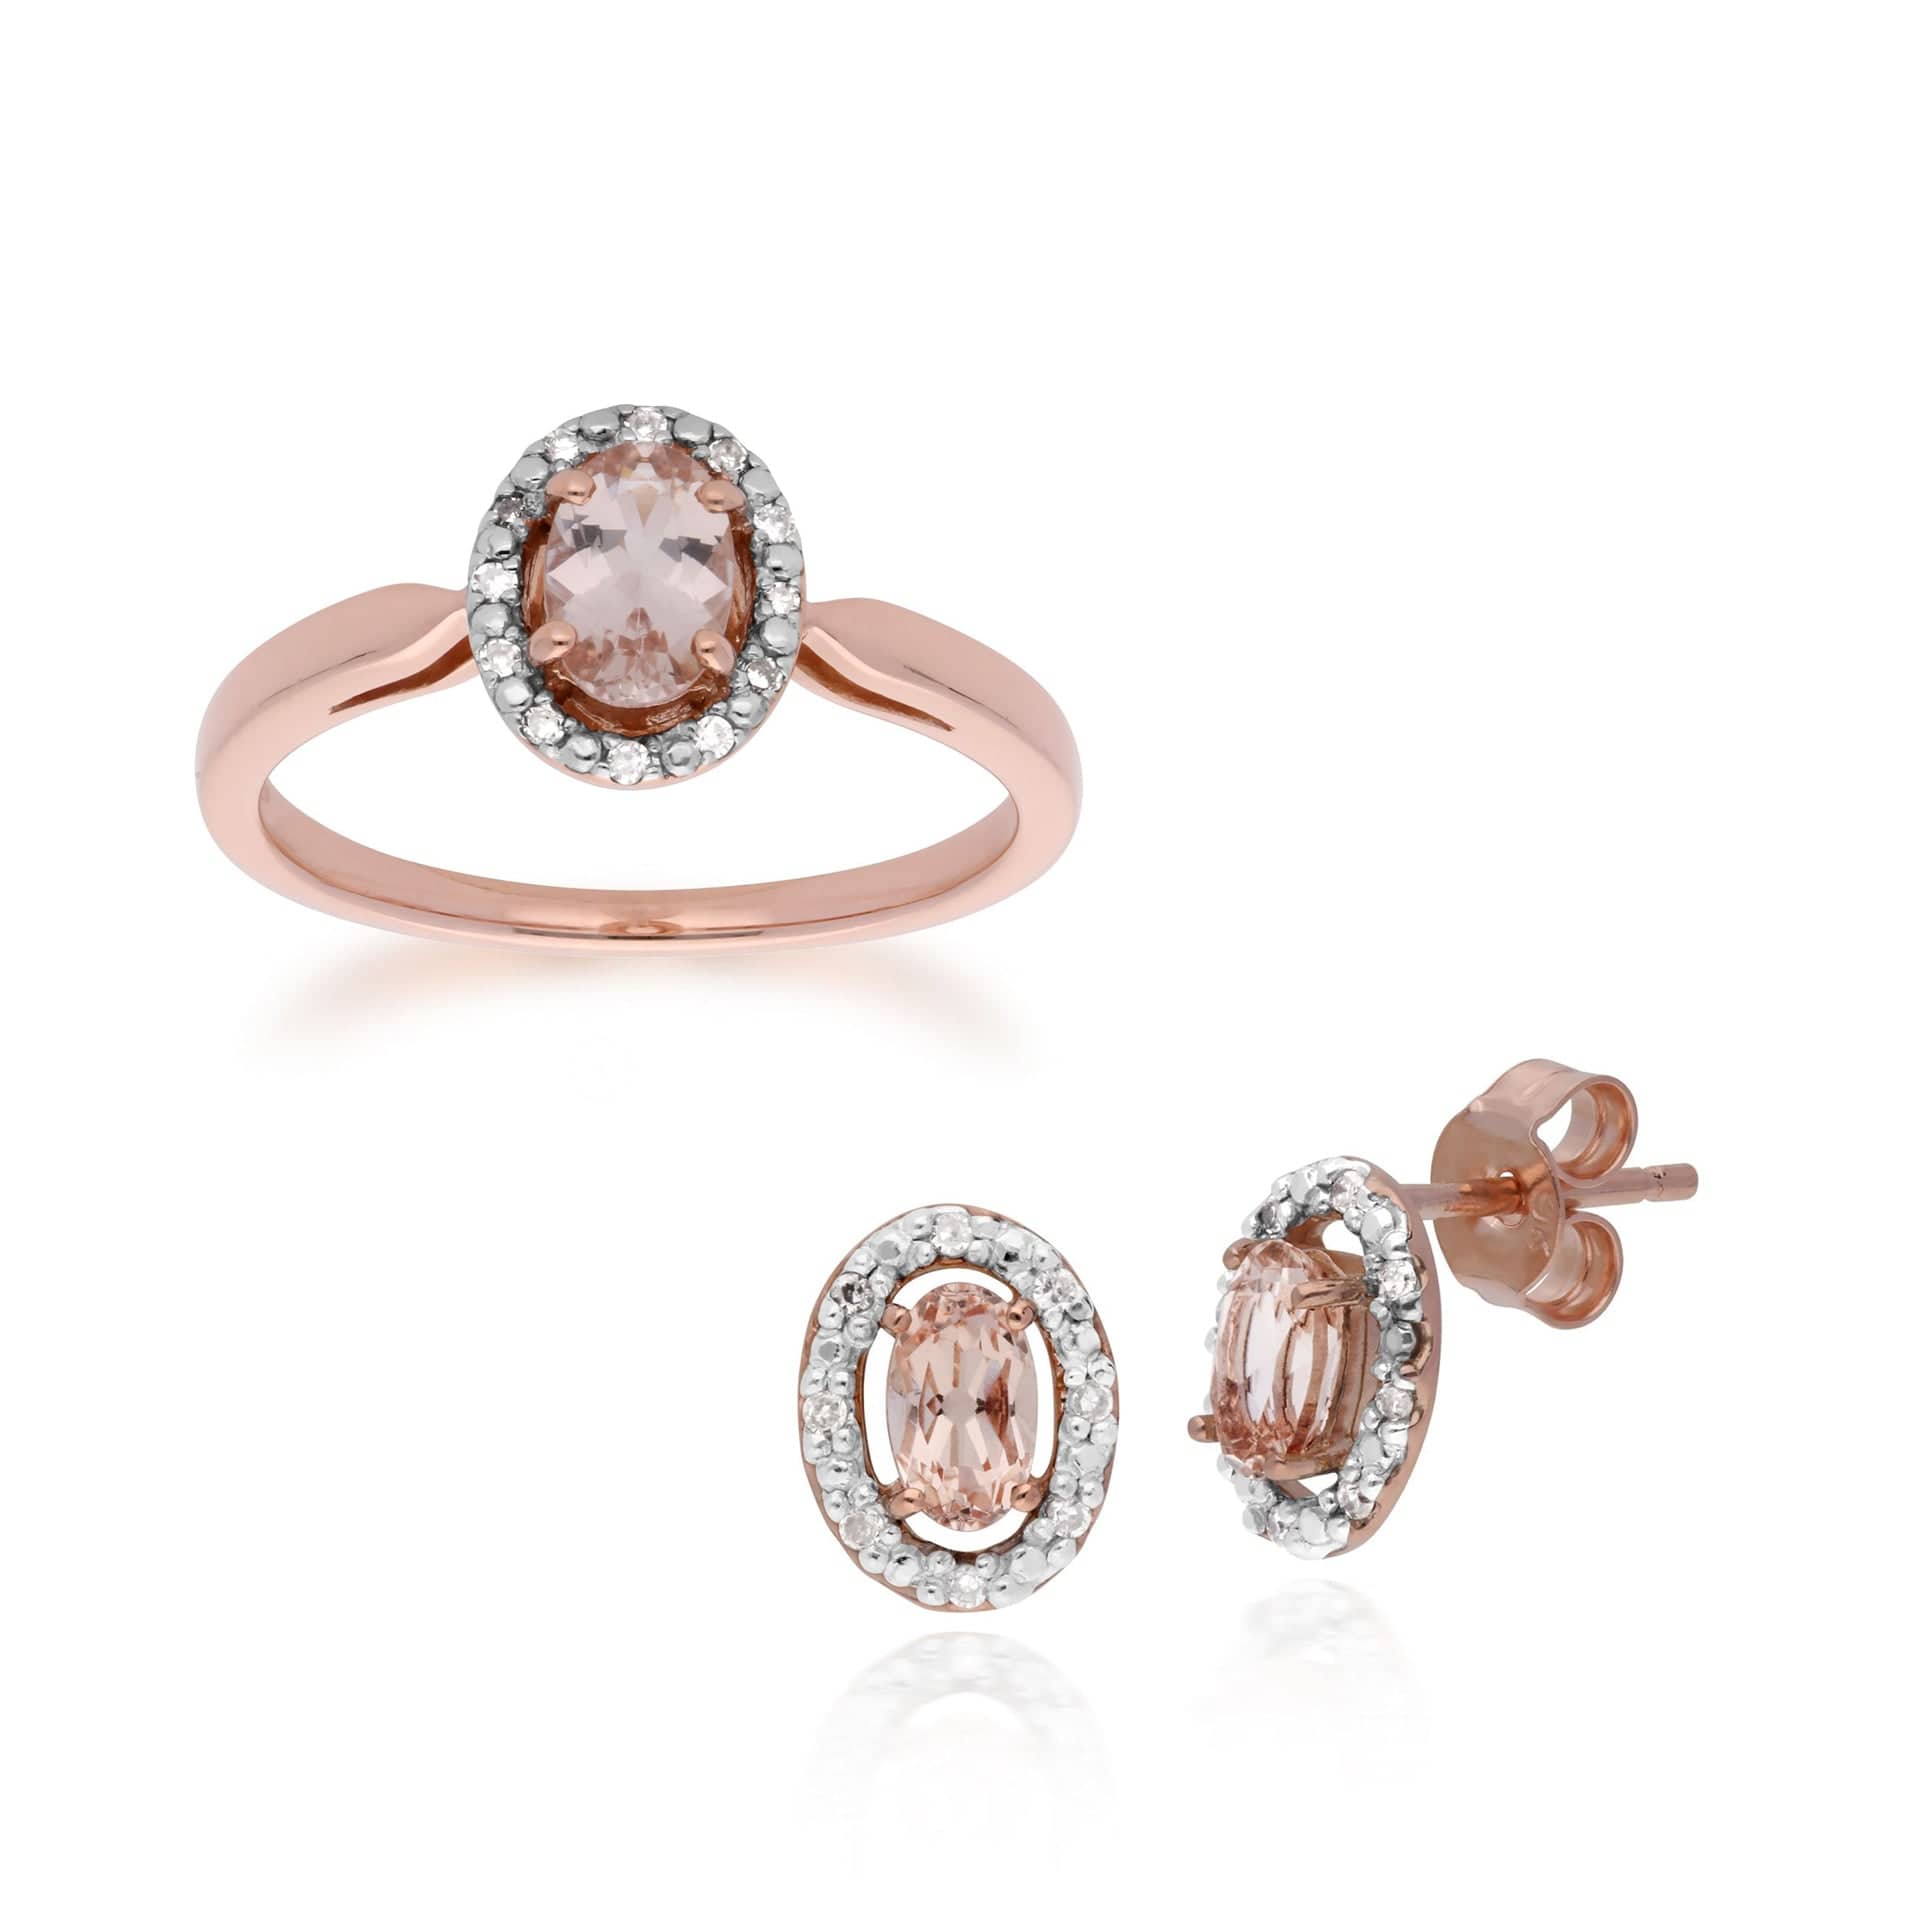 135E1451019-135R1589019 Classic Oval Morganite & Diamond Halo Stud Earrings & Solitaire Ring Set in 9ct Rose Gold 1